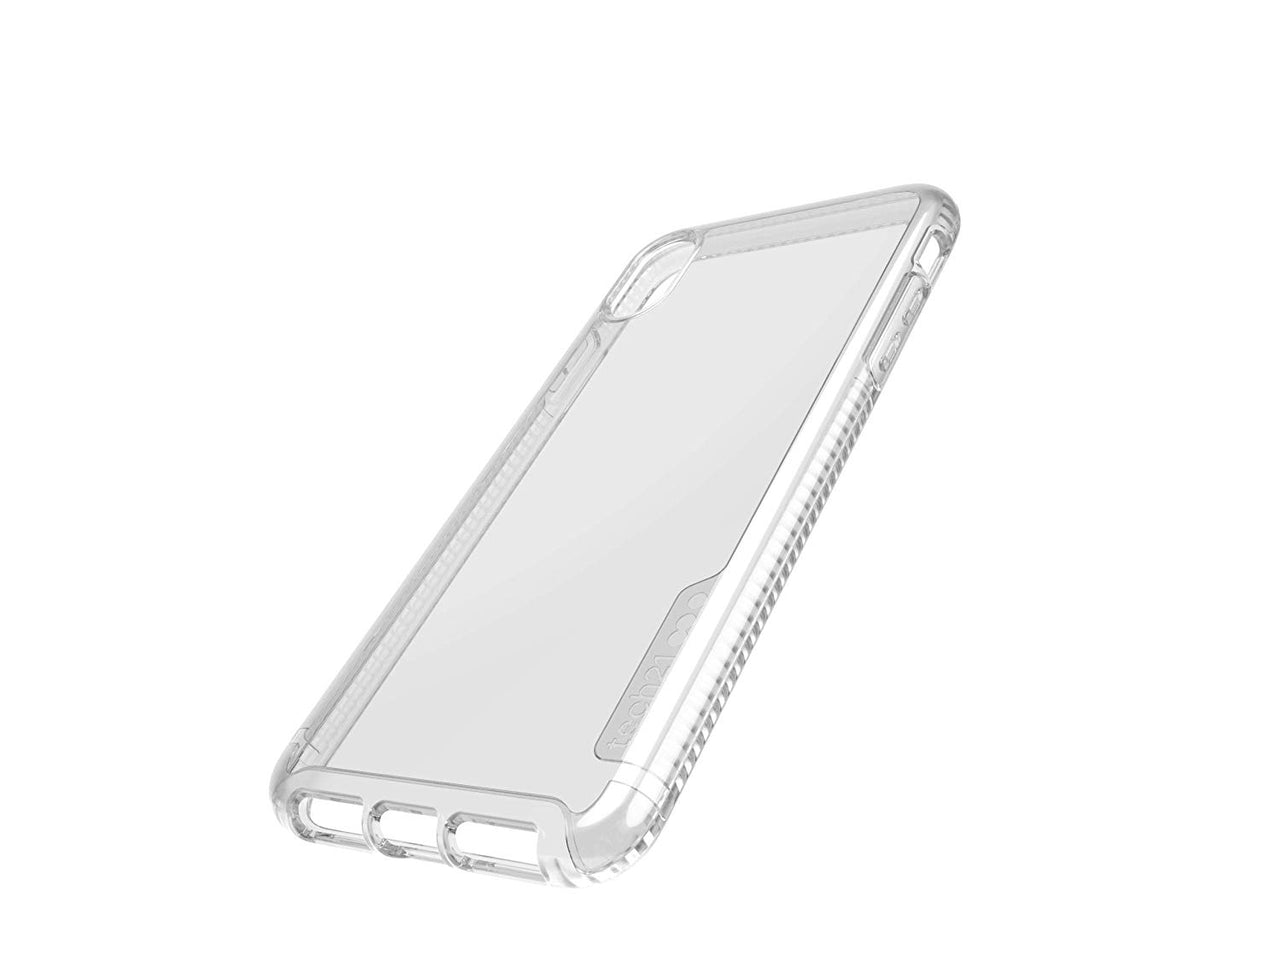 Tech21 Pure Clear Case for iPhone Xs Max - Clear